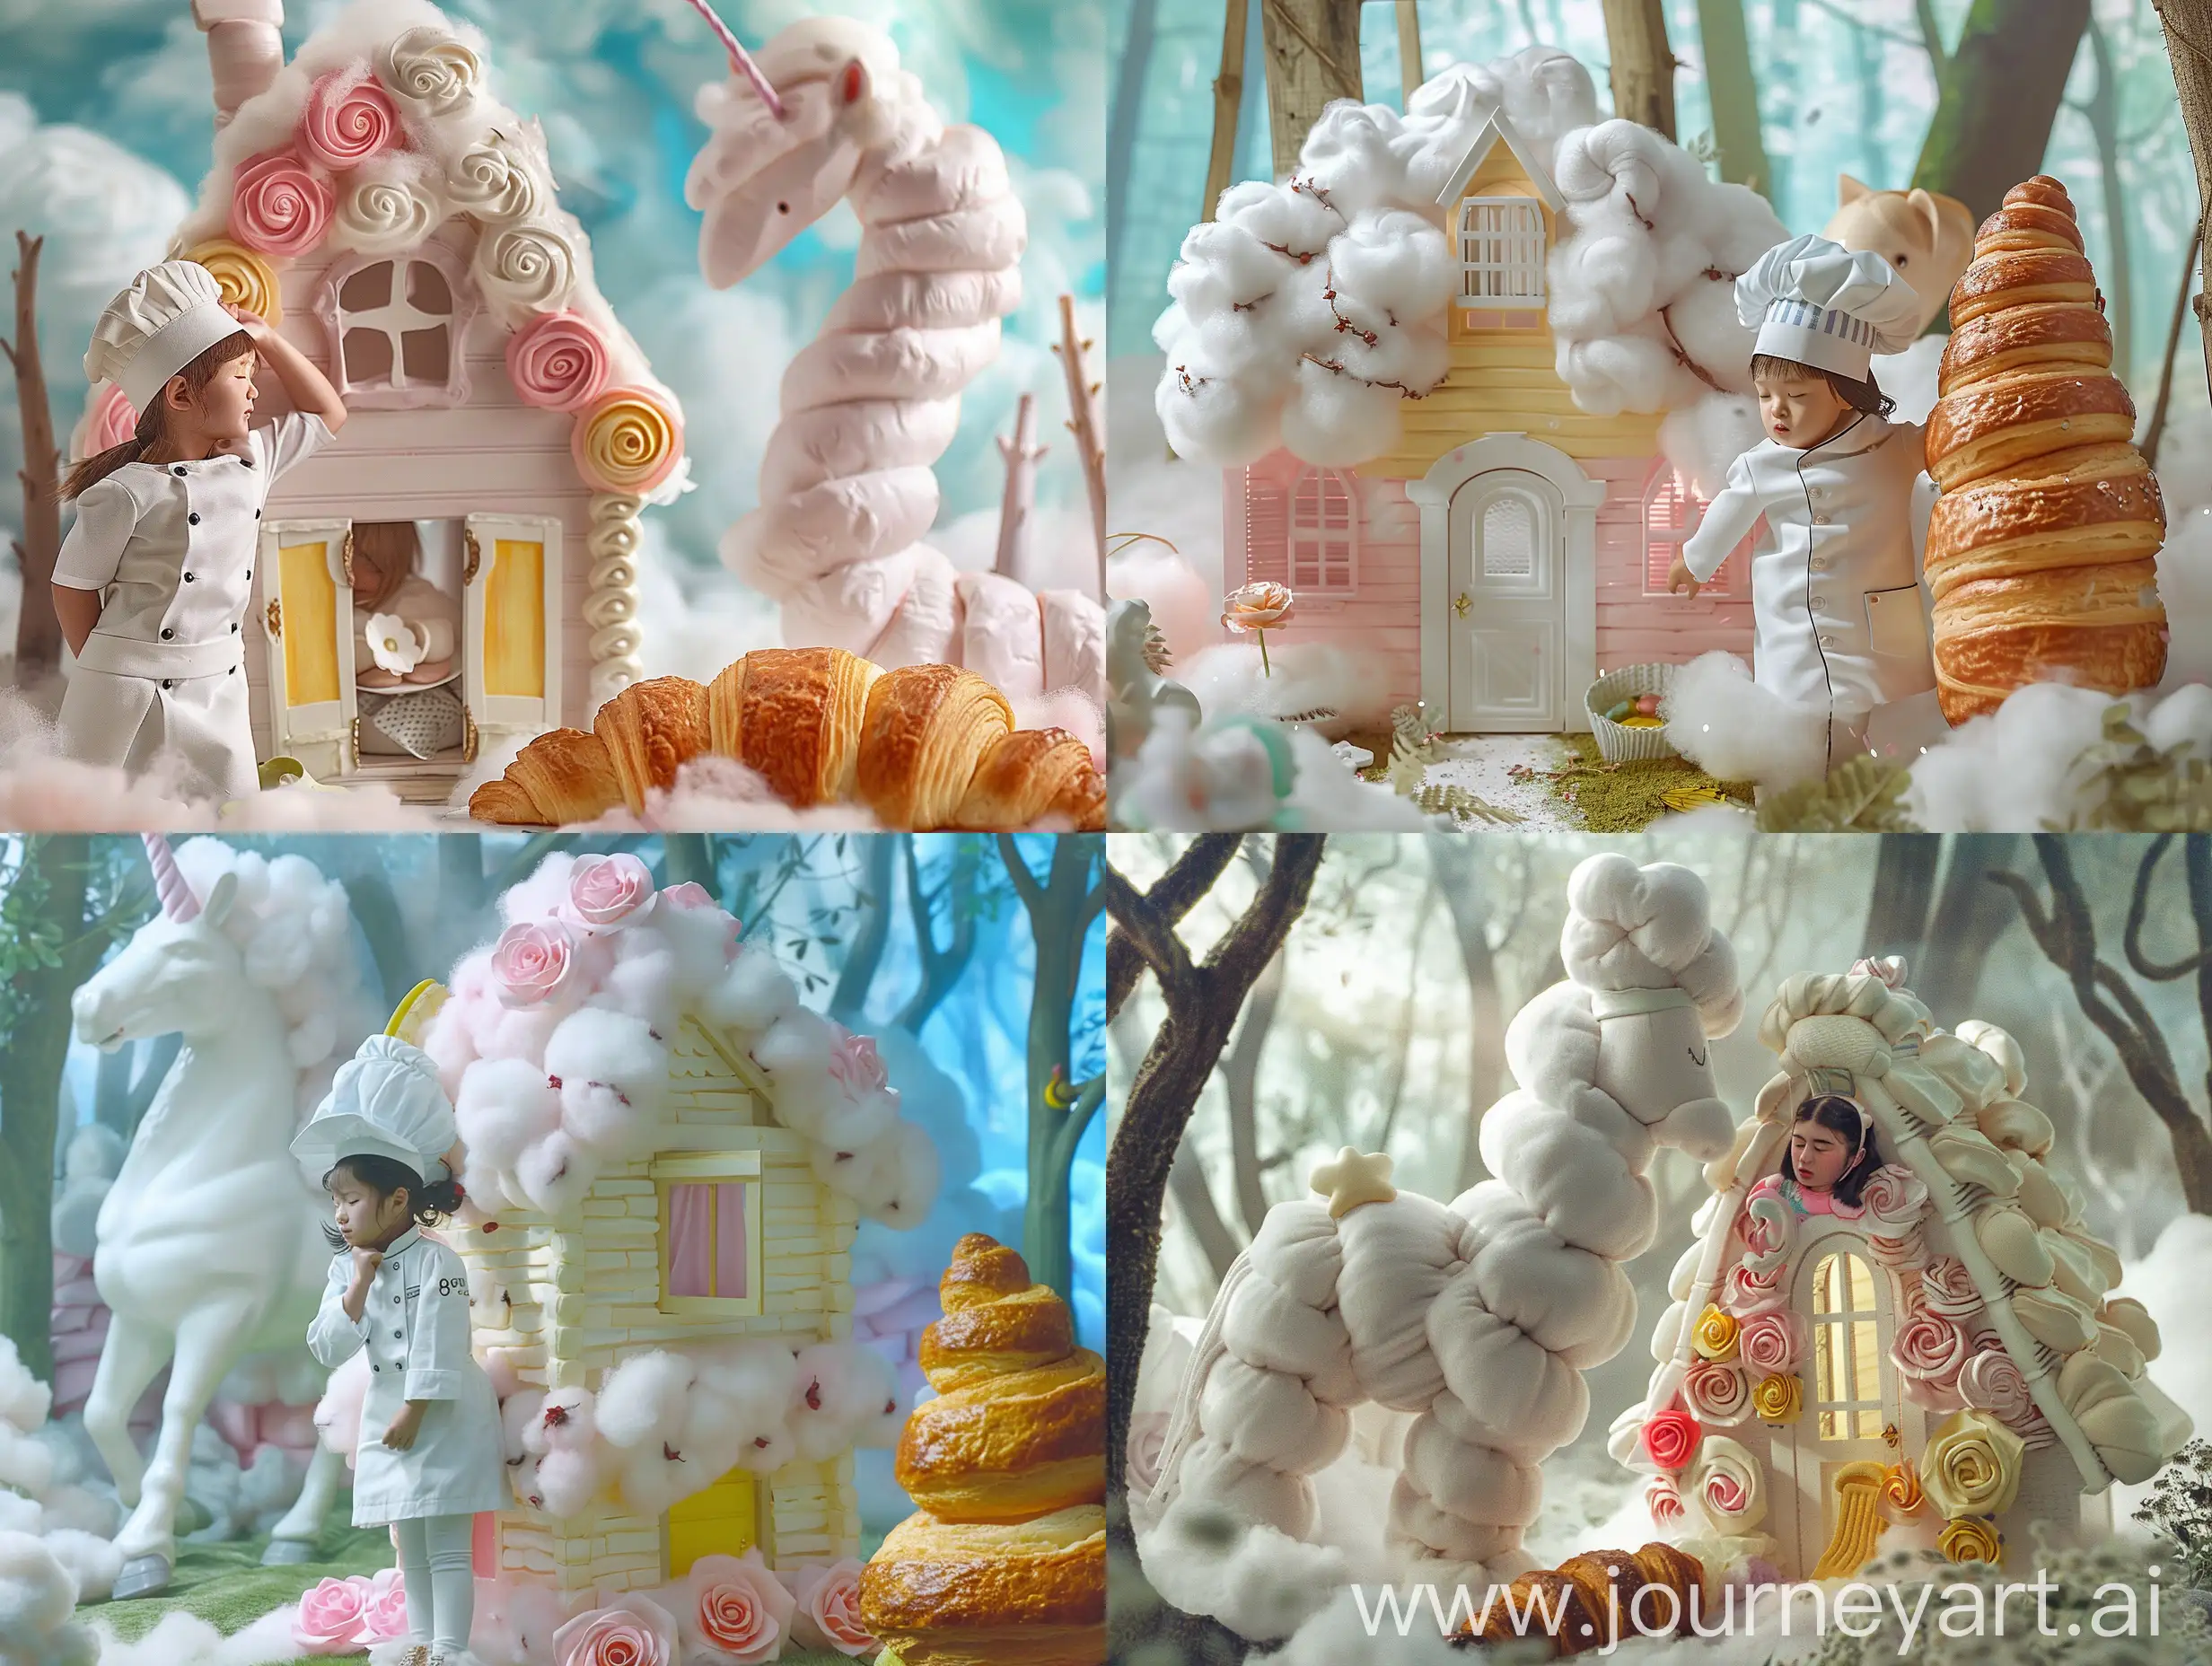 Creating a charming little house made of cotton candy, featuring shades of pink, rose, white, yellow, and blue. In the background, highlighting giant Croissant in white, creating a magical and cozy atmosphere. fairy tale. In the story, a girl is Little girl wearing cute chef uniform and chef hat, She suffers from sleepwalking. She closes her eyes, stretches her hands, and walks aimlessly in the forest. The style is inspired by Laurel Burch and Eric Carle. A curious little cute horse is next to the girl, looking at her with interest. make the movie feel stronger and enhance the dramatic tension. 8K, real
